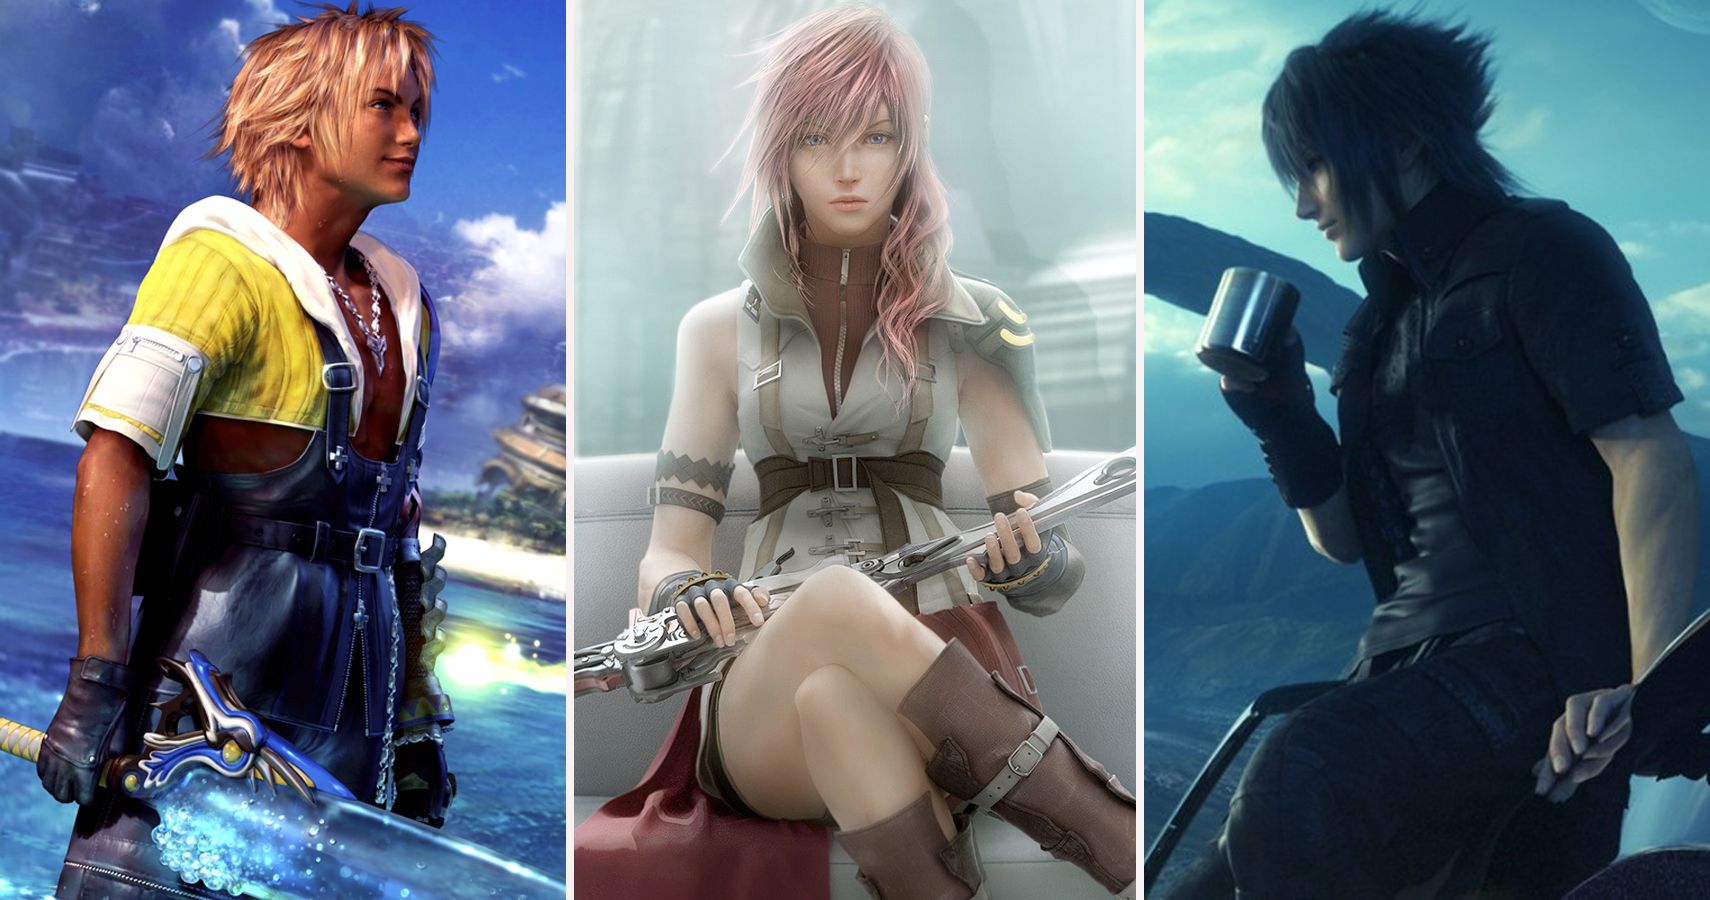 FF7: Every Game Ranked, According to Critics